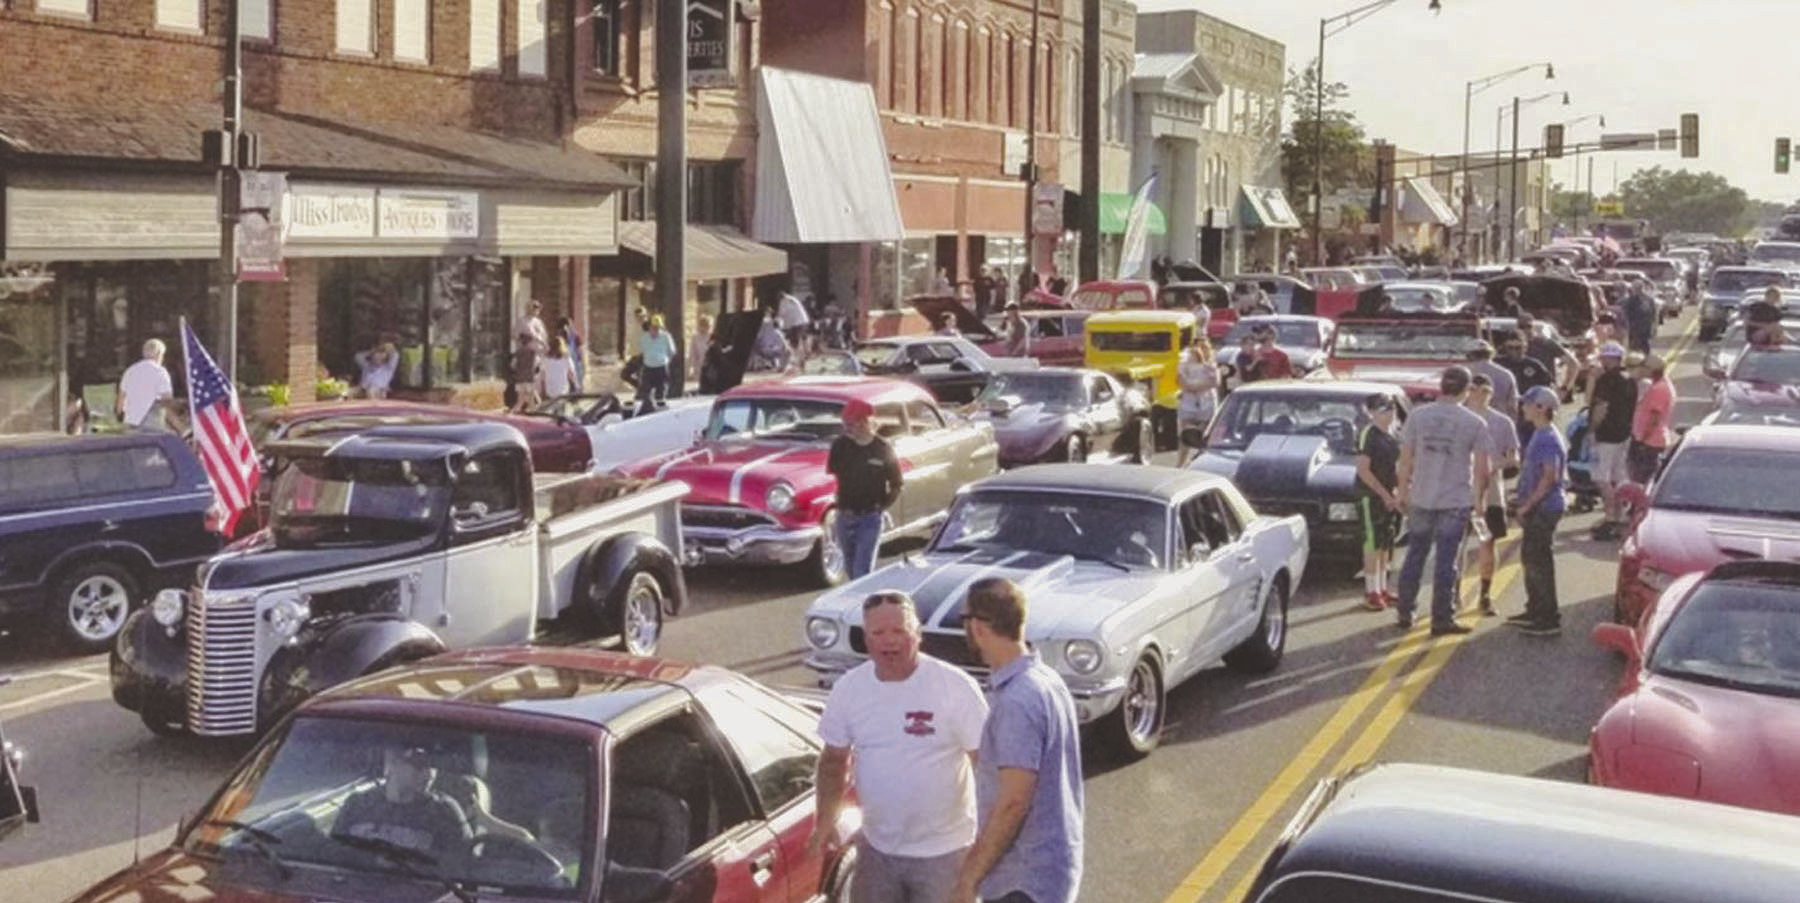 This file photo showcases the primary event of the annual Heartland Cruise Car Show in Weatherford.